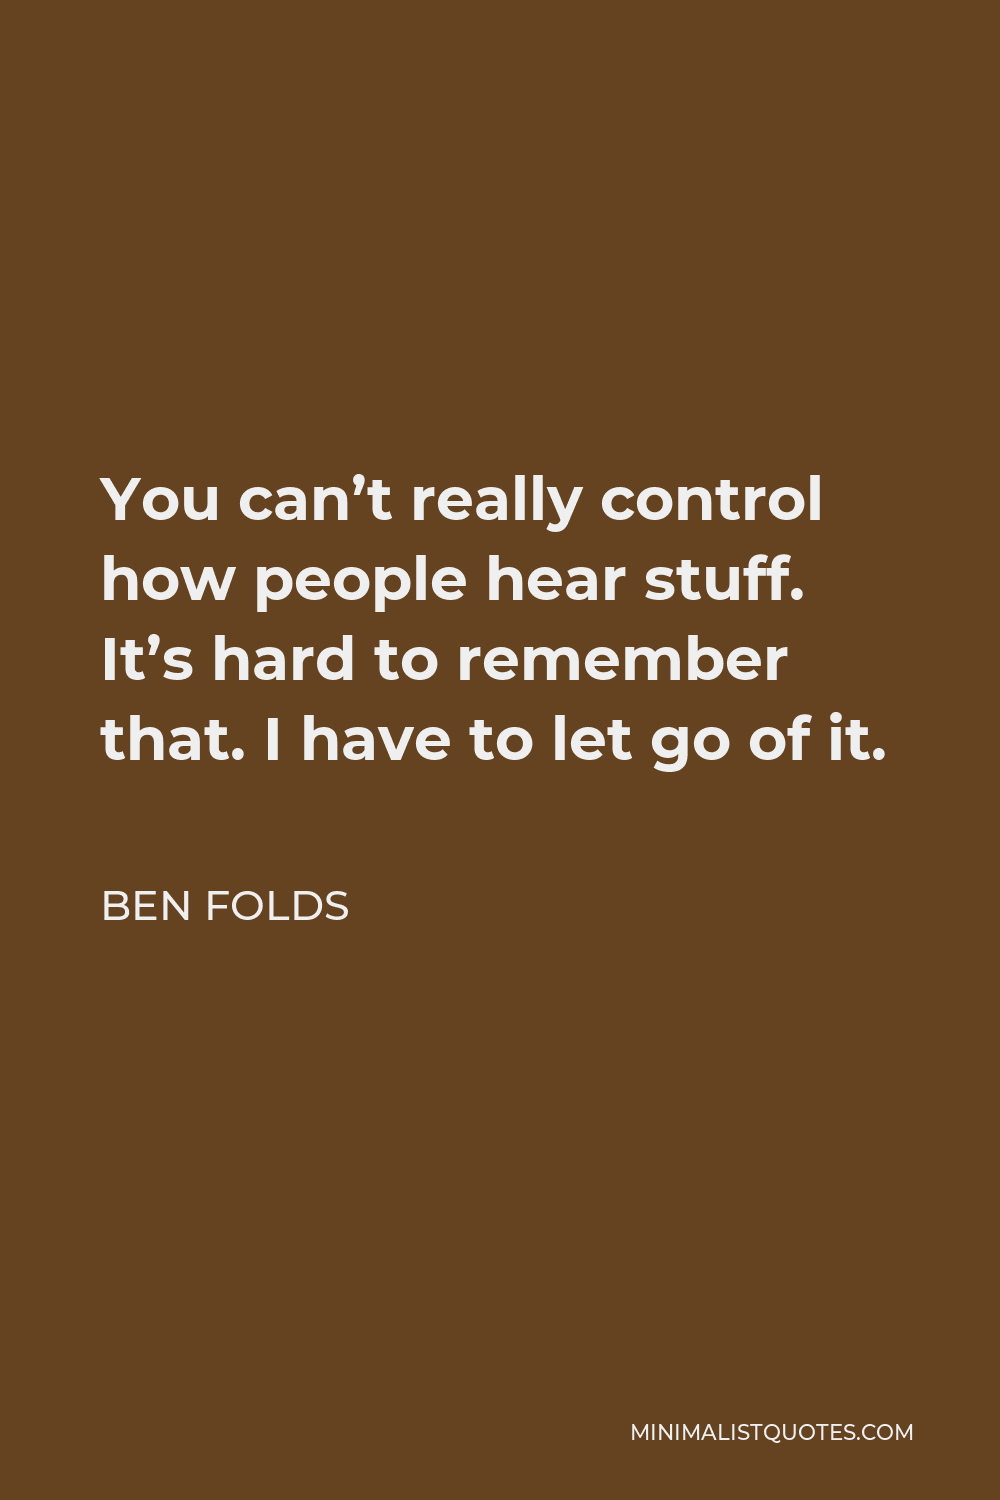 Ben Folds Quote - You can’t really control how people hear stuff. It’s hard to remember that. I have to let go of it.